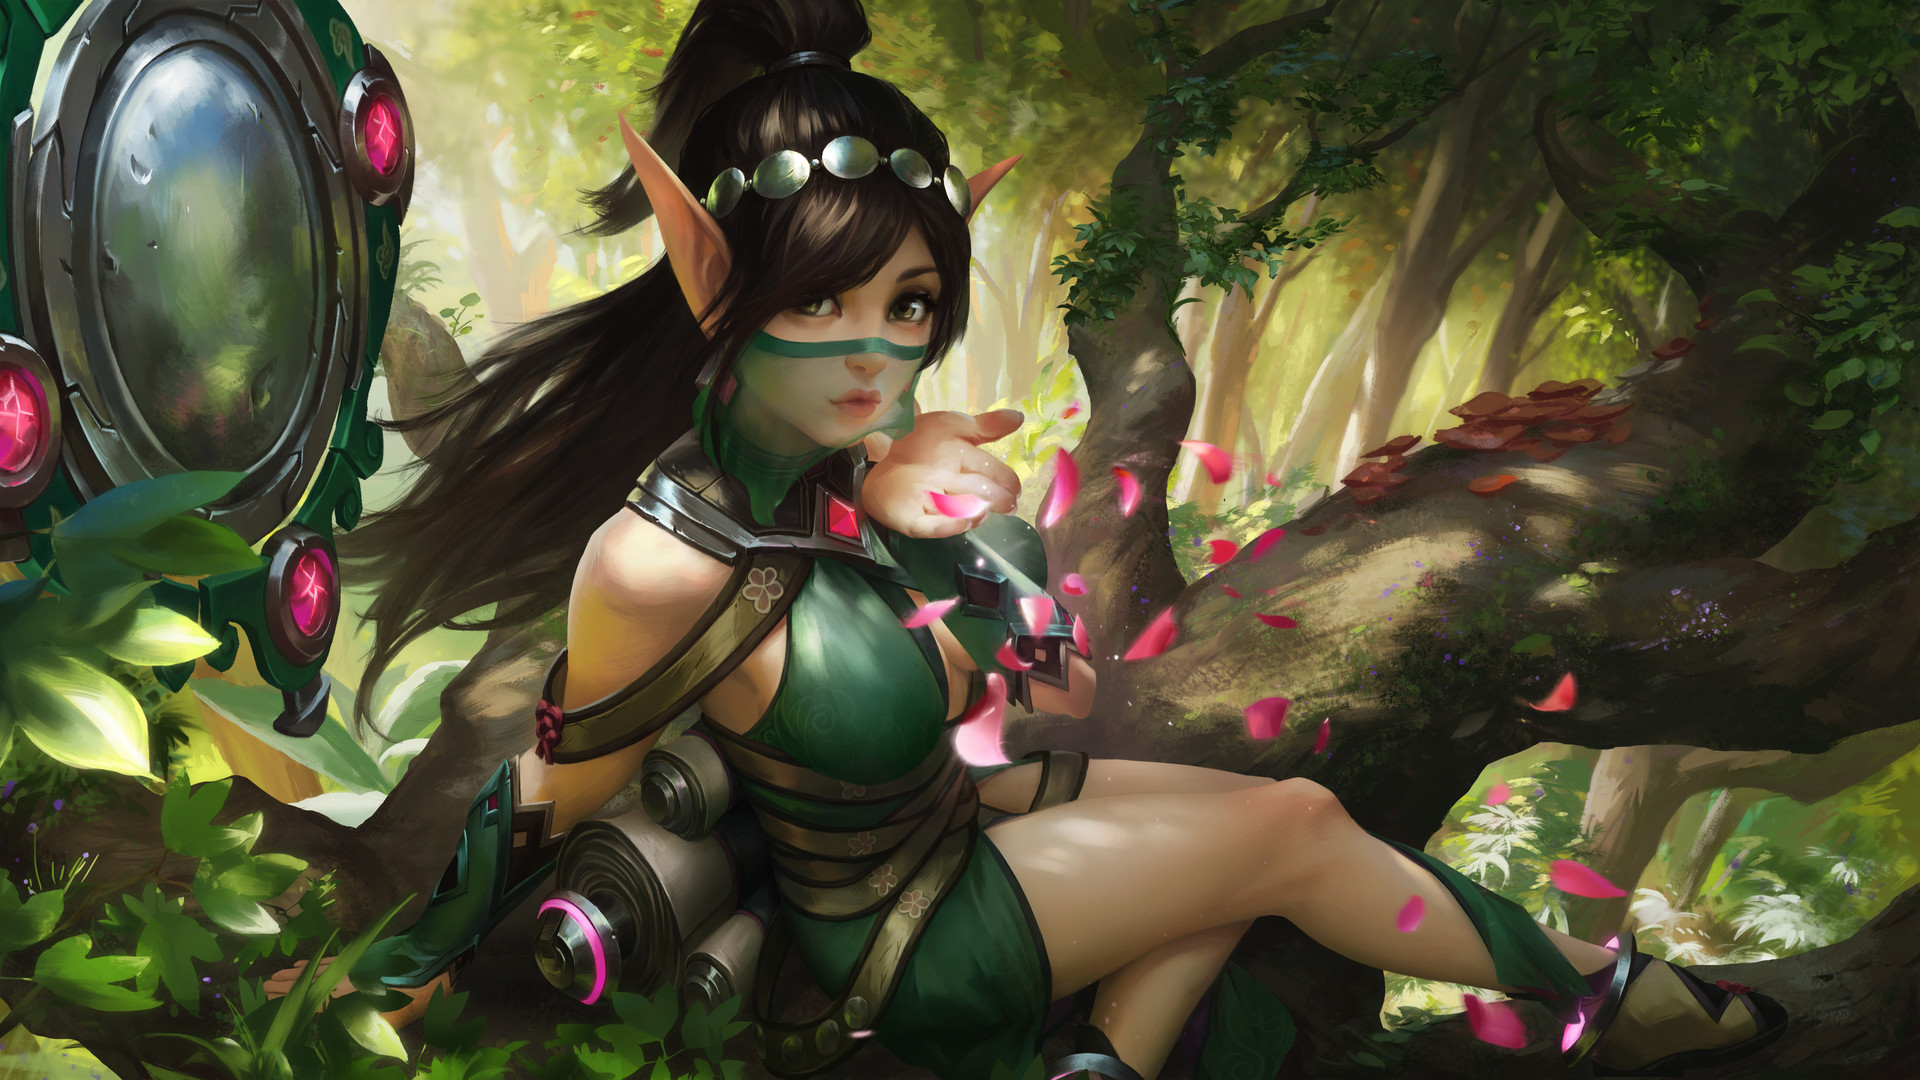 General 1920x1080 digital art artwork video games women brunette black hair fantasy art thighs looking at viewer cleavage elves pointy ears tight clothing veils ponytail Paladins: Champions of the Realm Ying (Paladins)